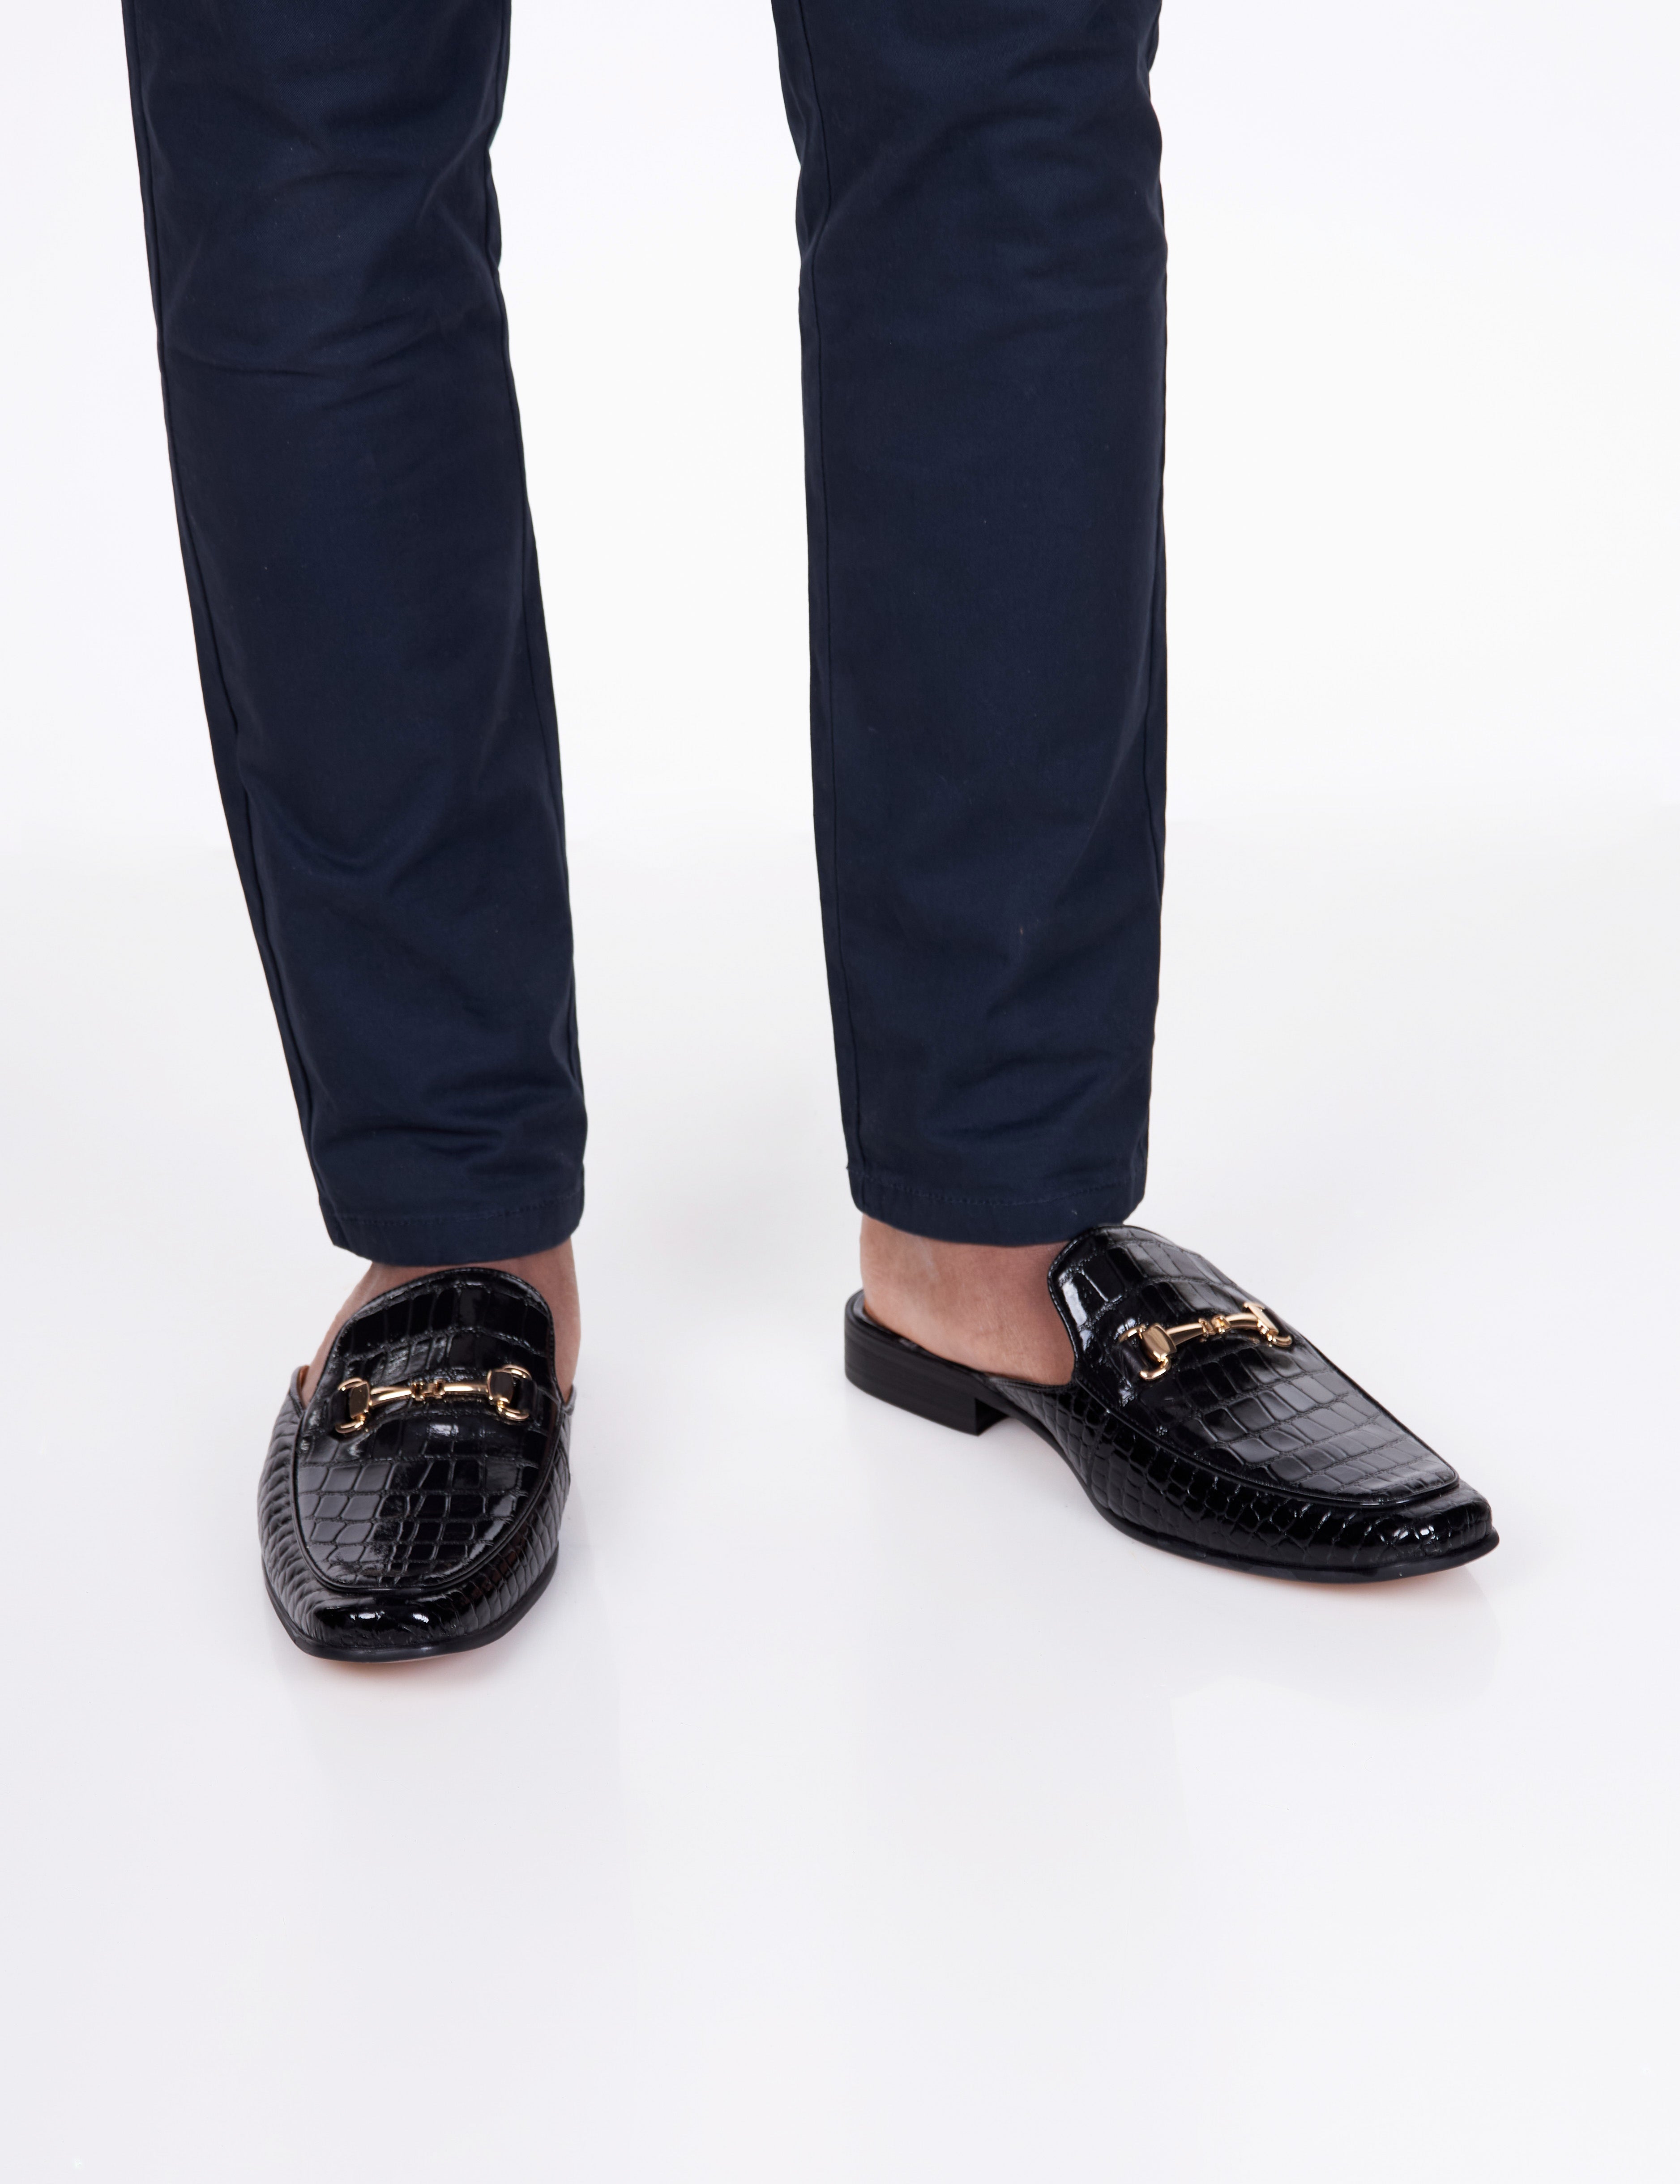 REAL LEATHER SHINY PRINTED HALF SHOES IN BLACK